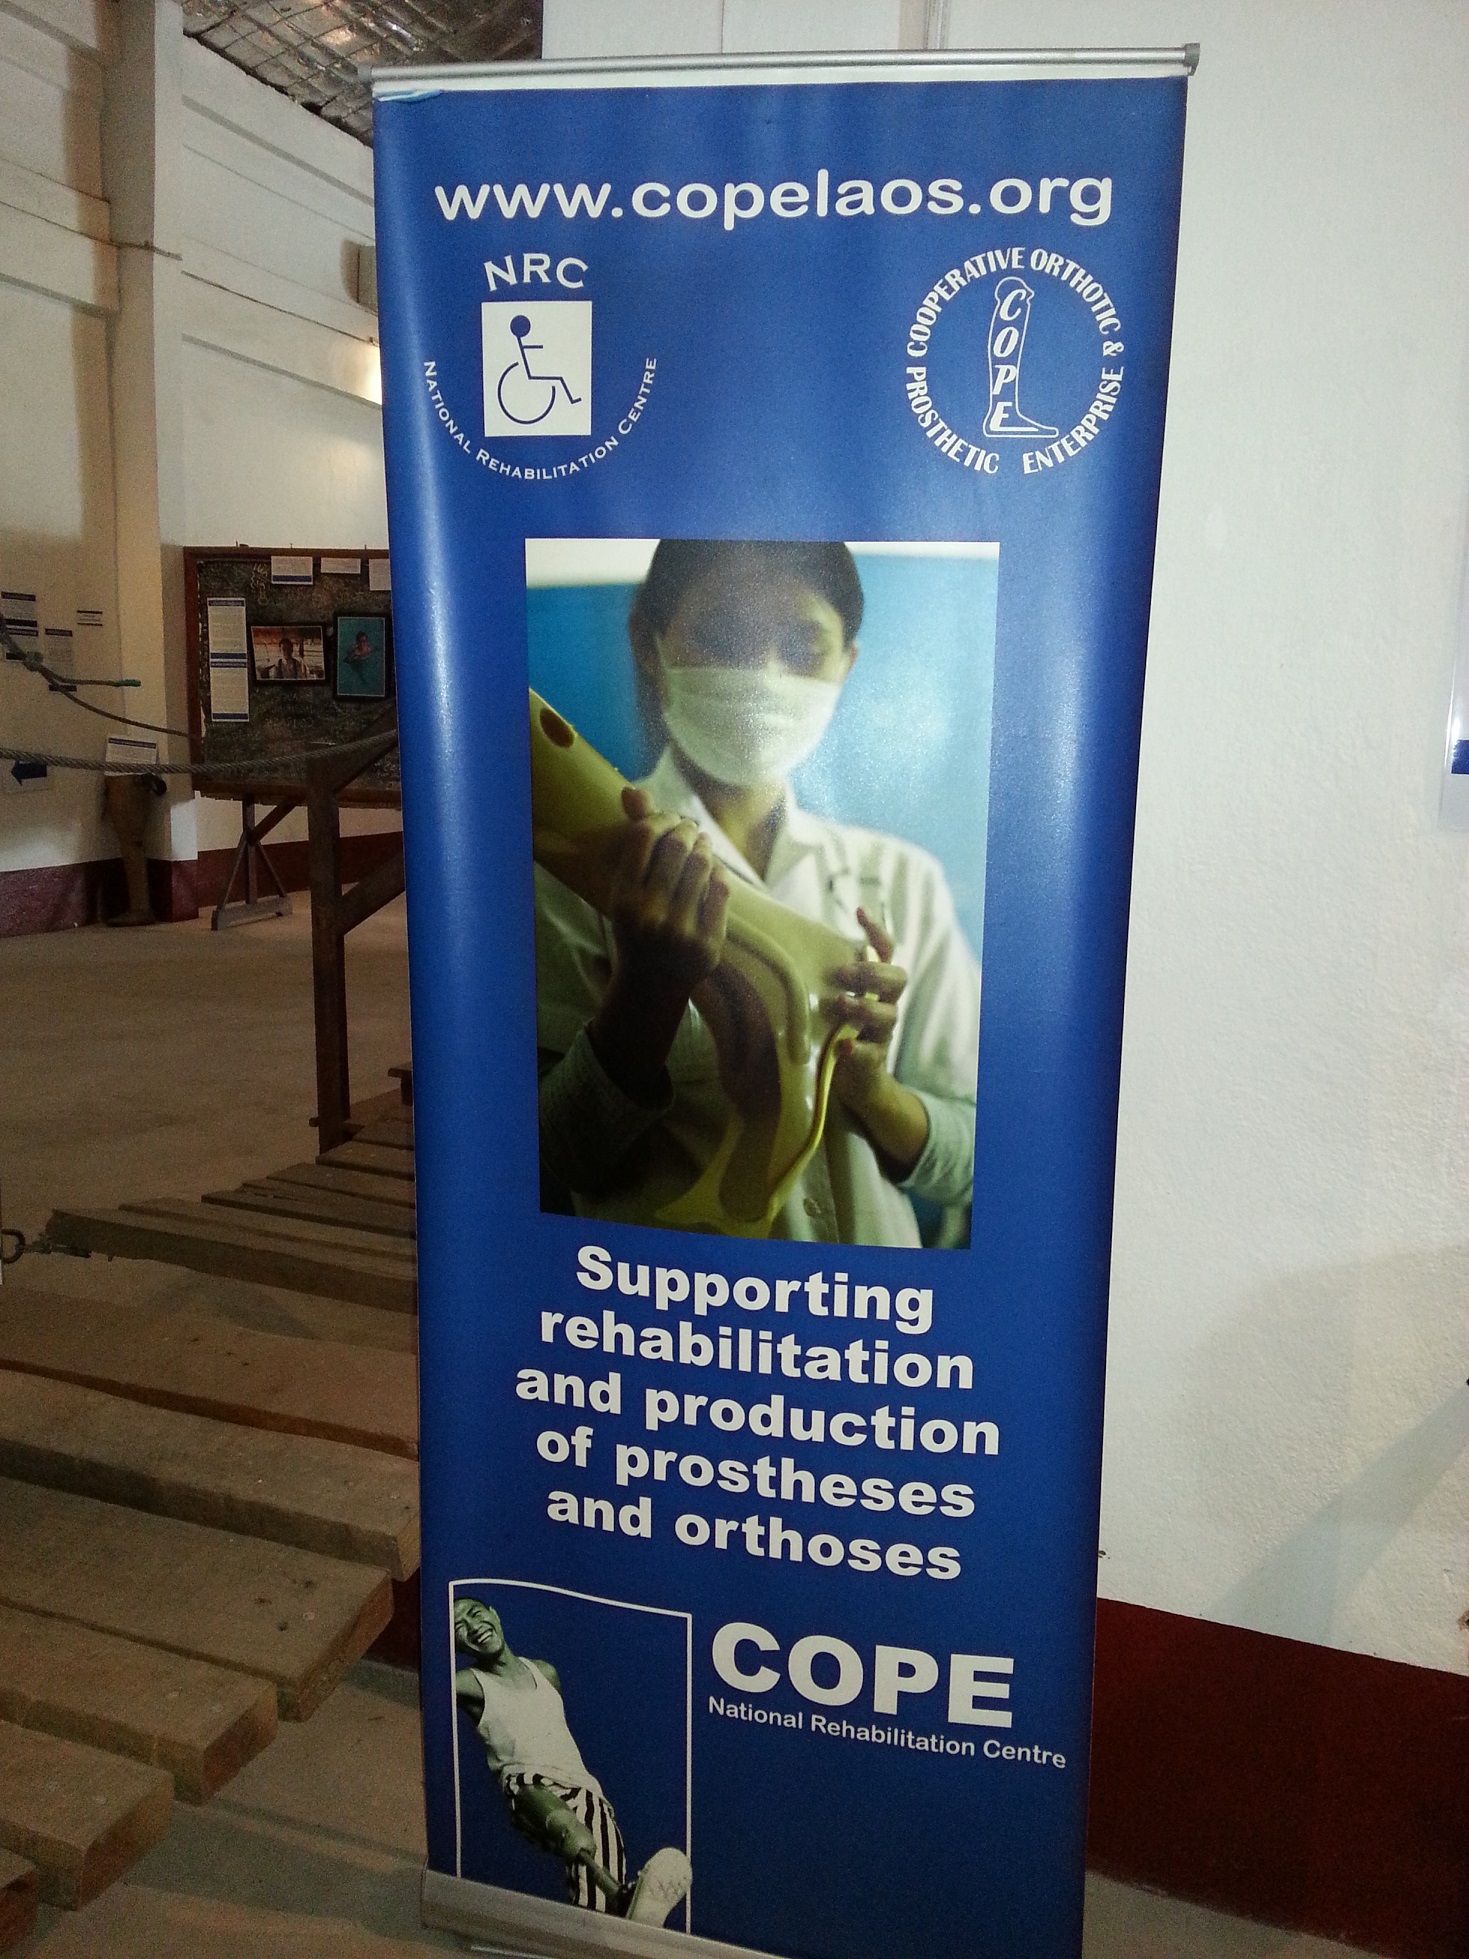 A banner of COPE encourage to supporting rehabilitation and production of prostheses and orthoses